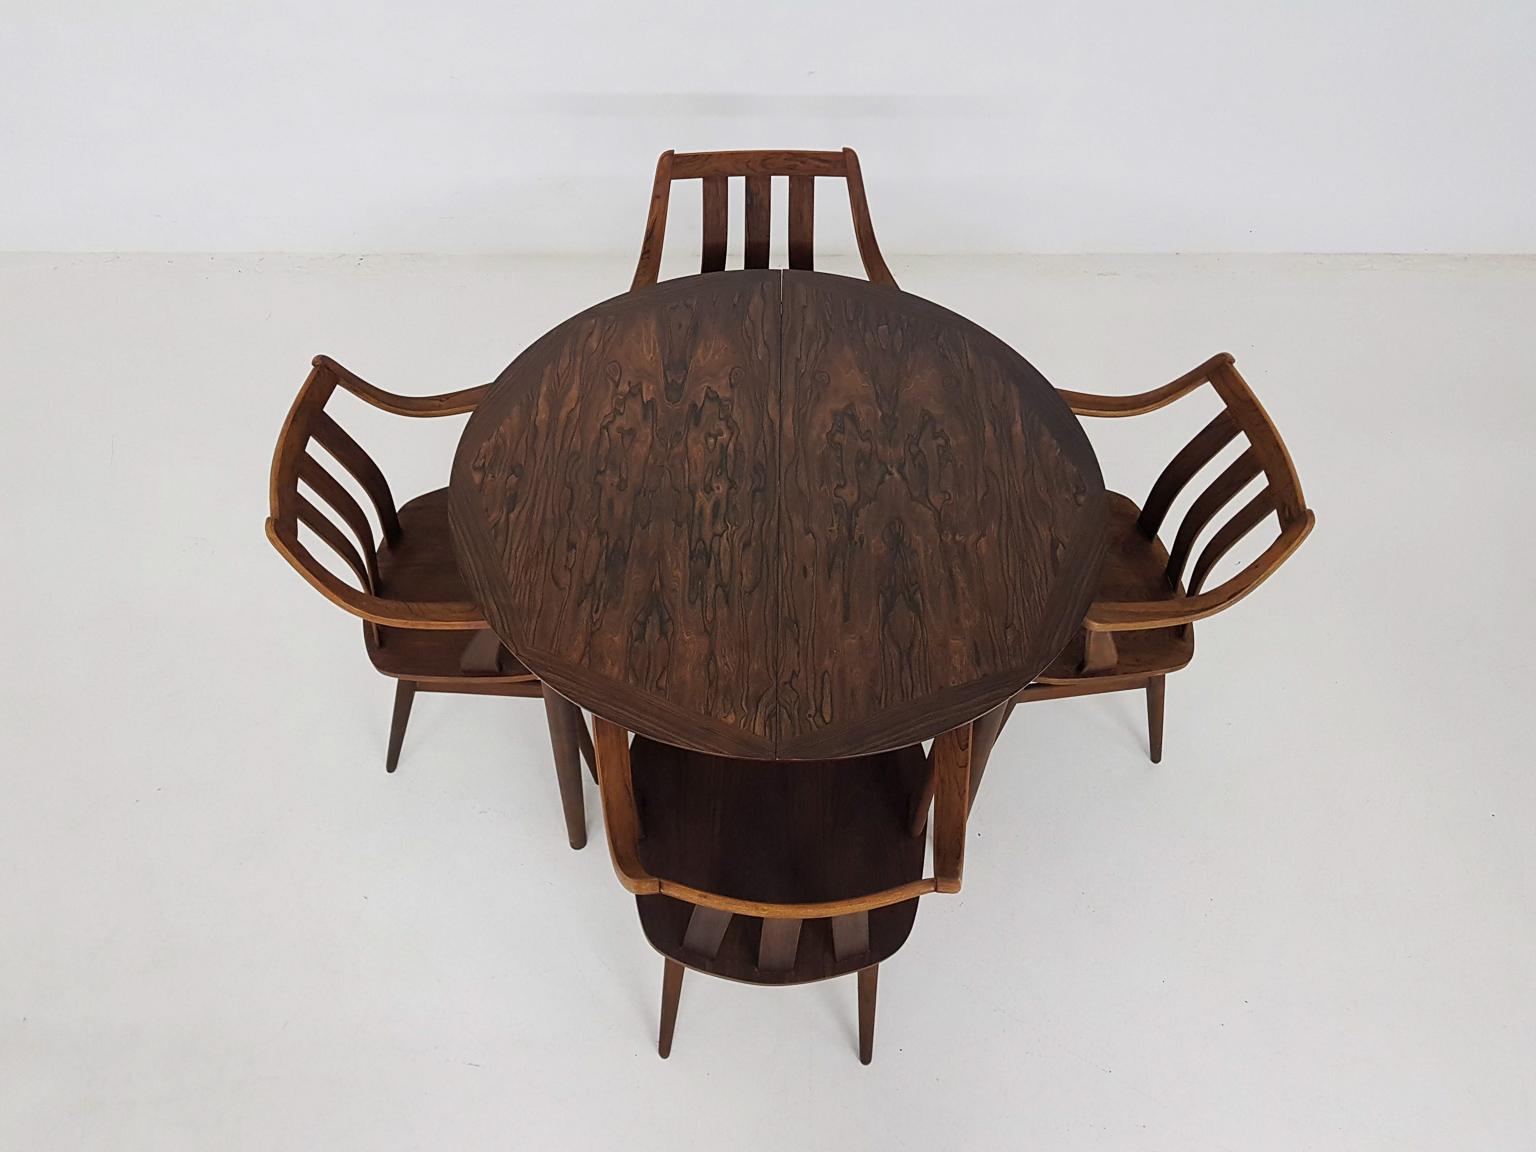 Beautiful midcentury rosewood dining set consisting of a table and four chairs.

The set is made of the best dark rosewood veneer with a beautiful grain to the wood. Chairs have elegant shapes and remind us of Danish design. Table can be extended